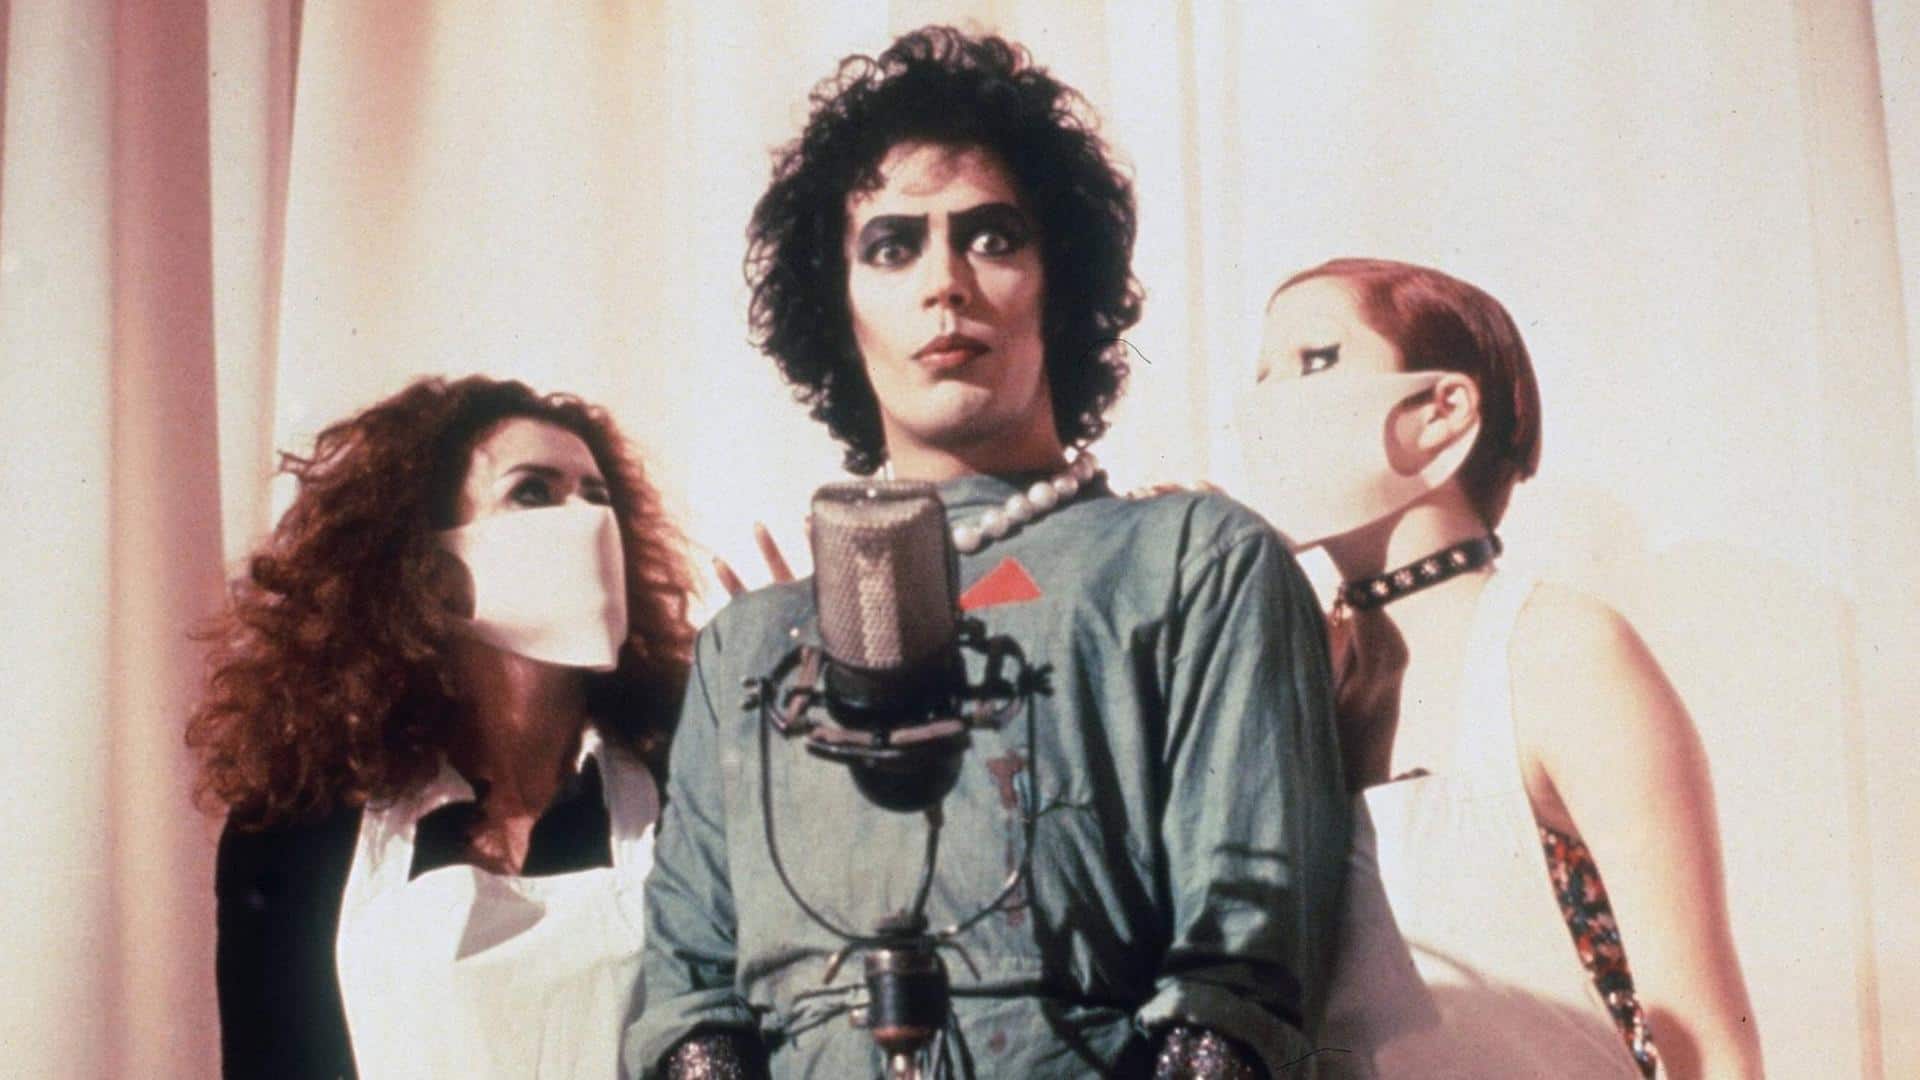 Movie: The Rocky Horror Picture Show